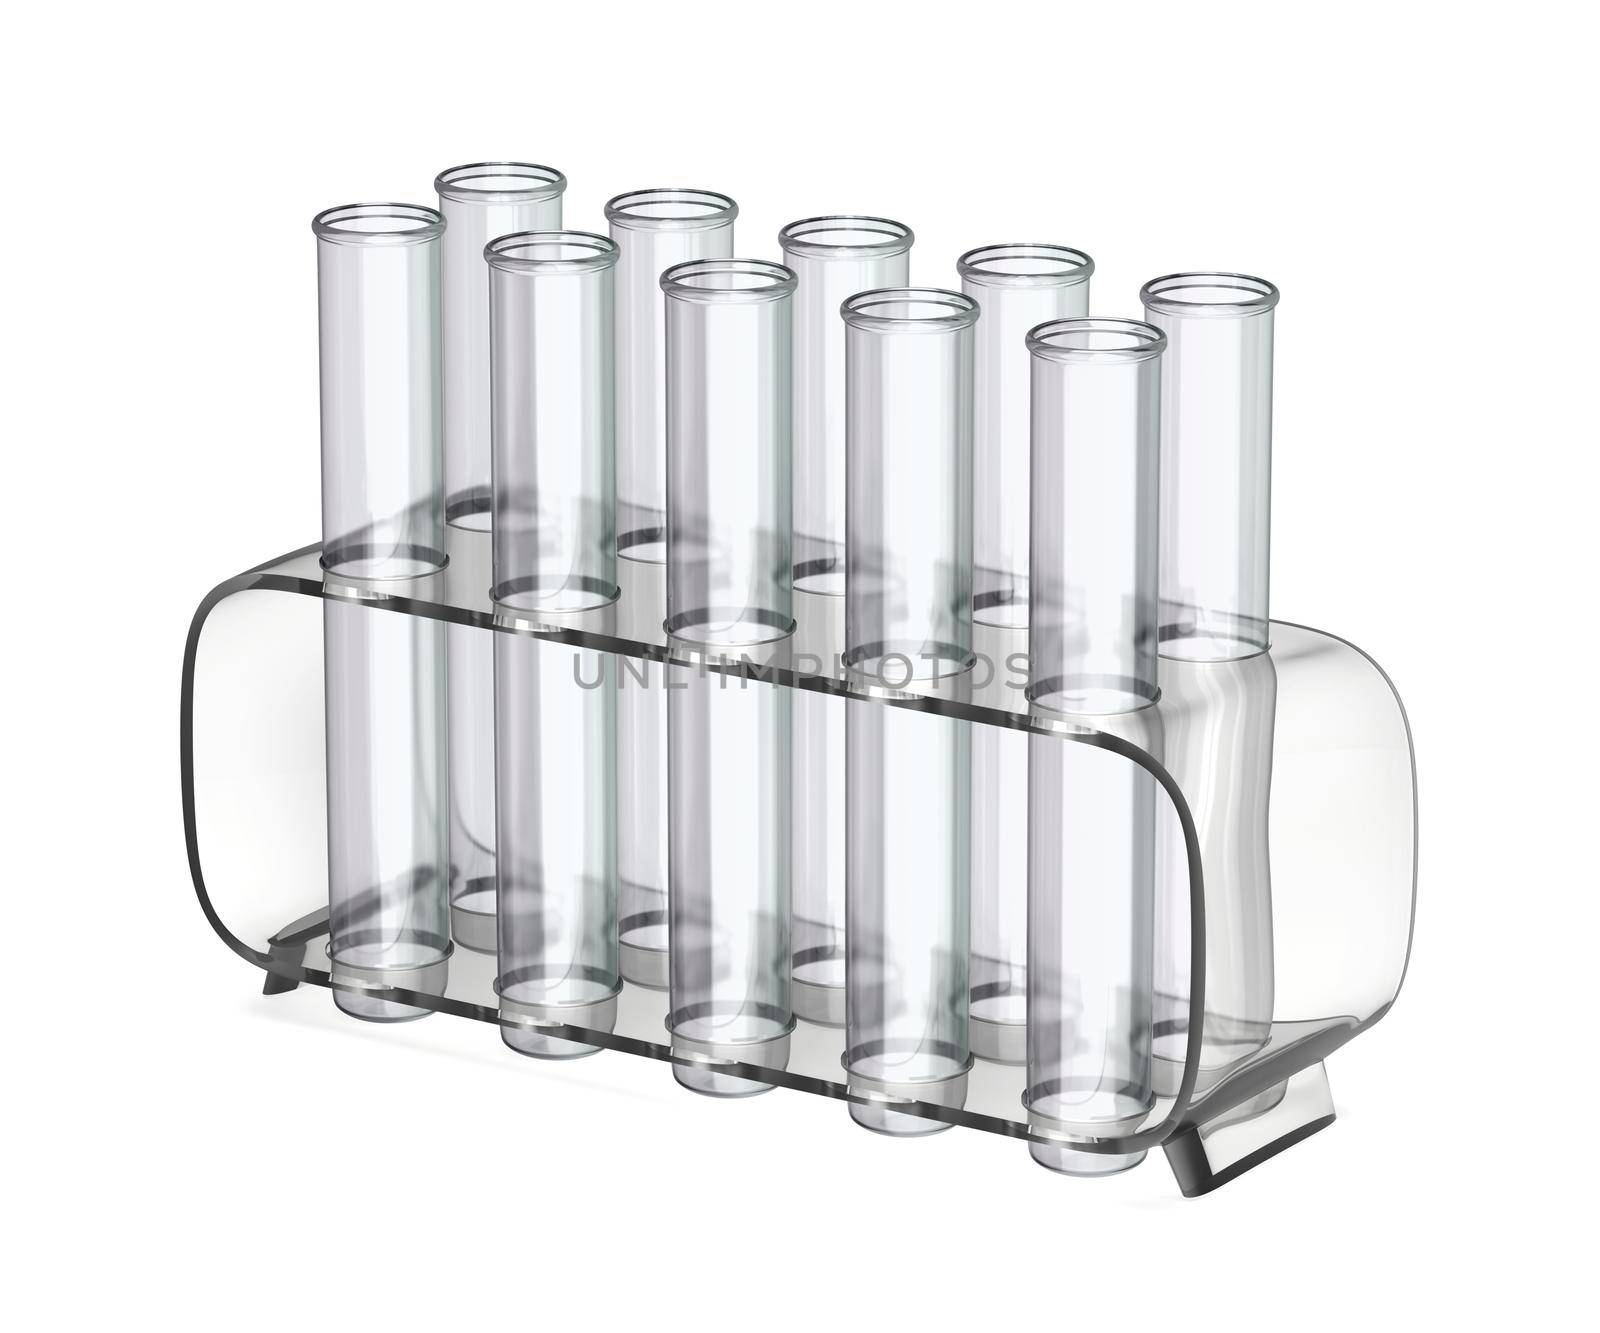 Empty test tubes in a rack by magraphics